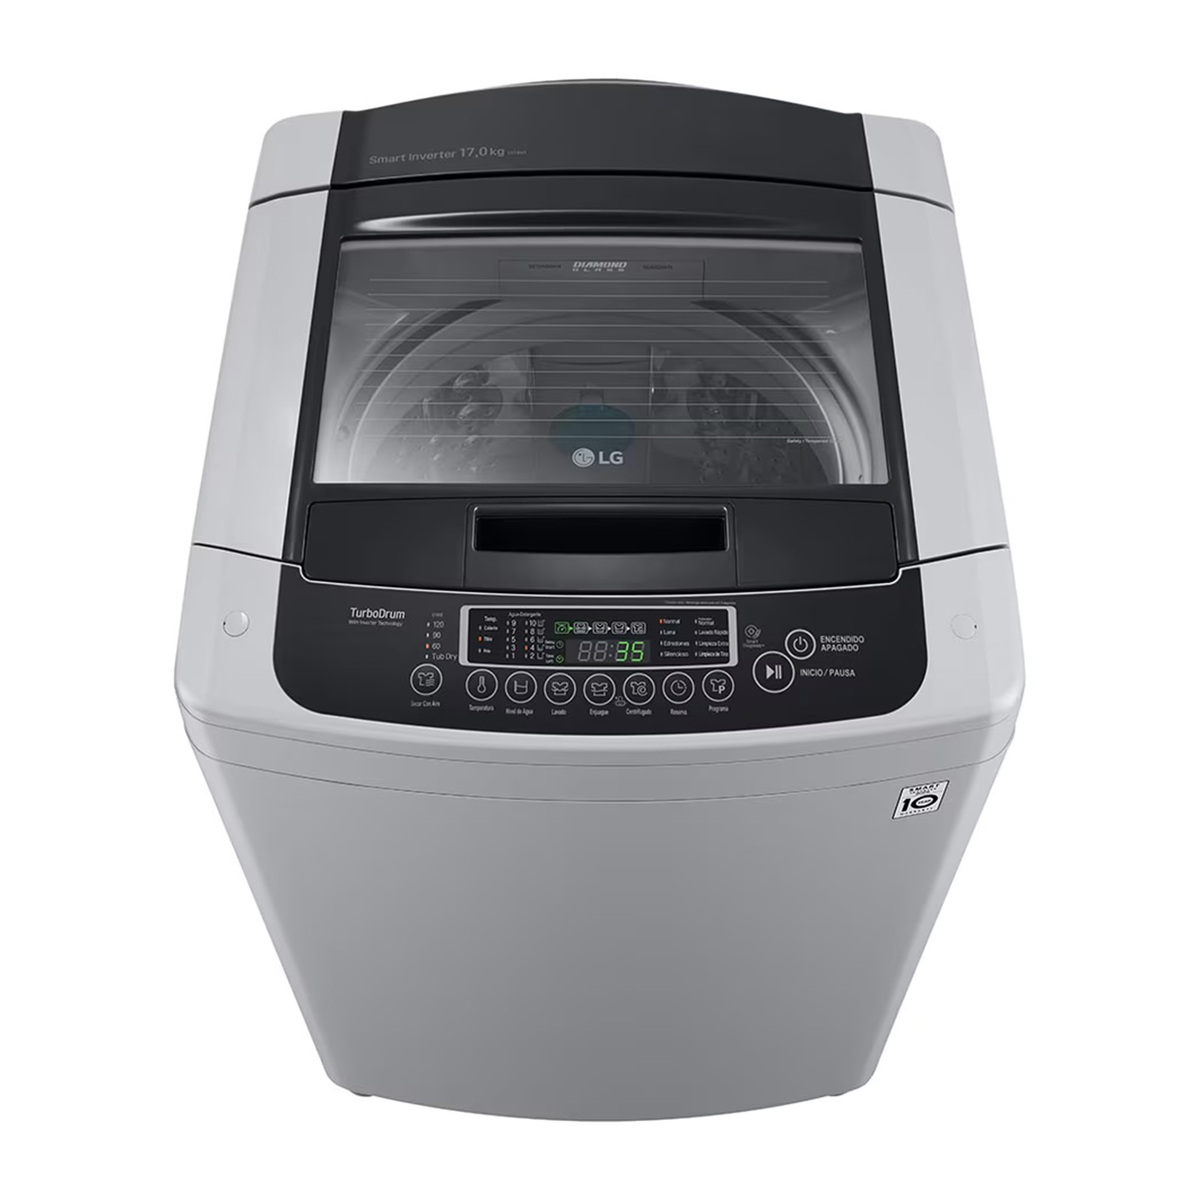 LG Top Load Fully Automatic Washing Machine, 12 Kg, Silver, T1785NEHTE